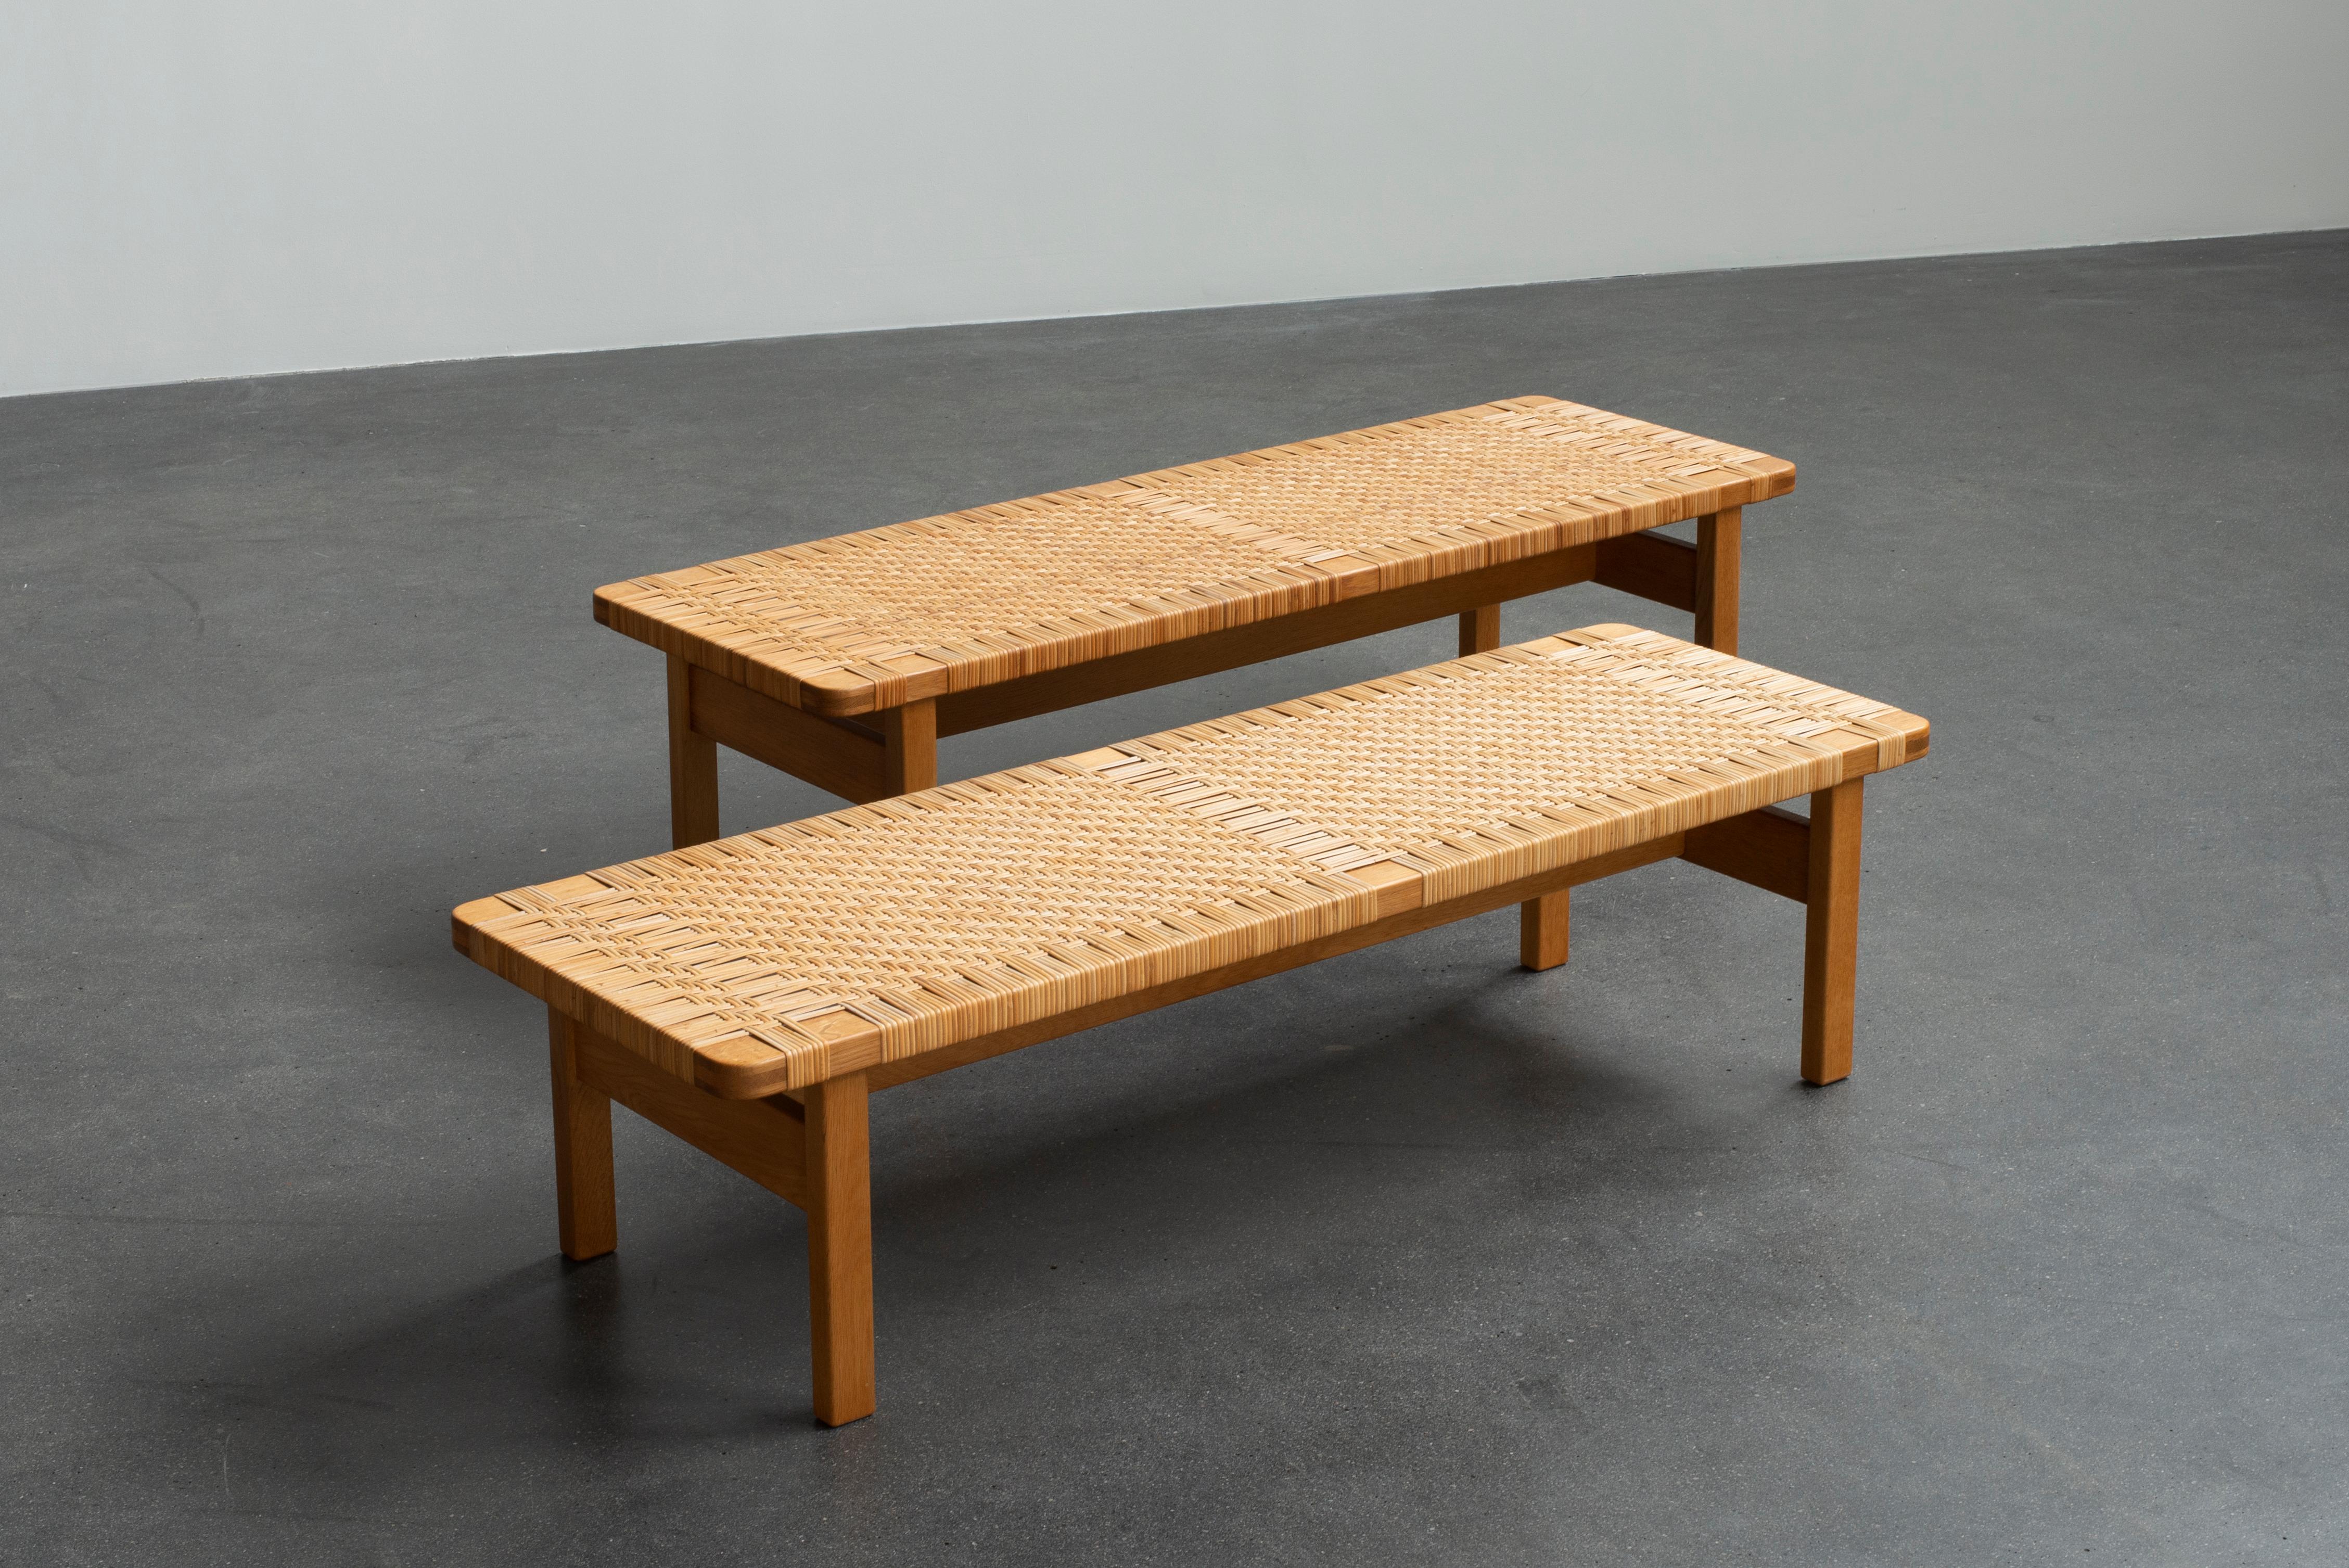 Børge Mogensen a pair of oak benches with top of woven cane. Manufactured by Fredericia Furniture.